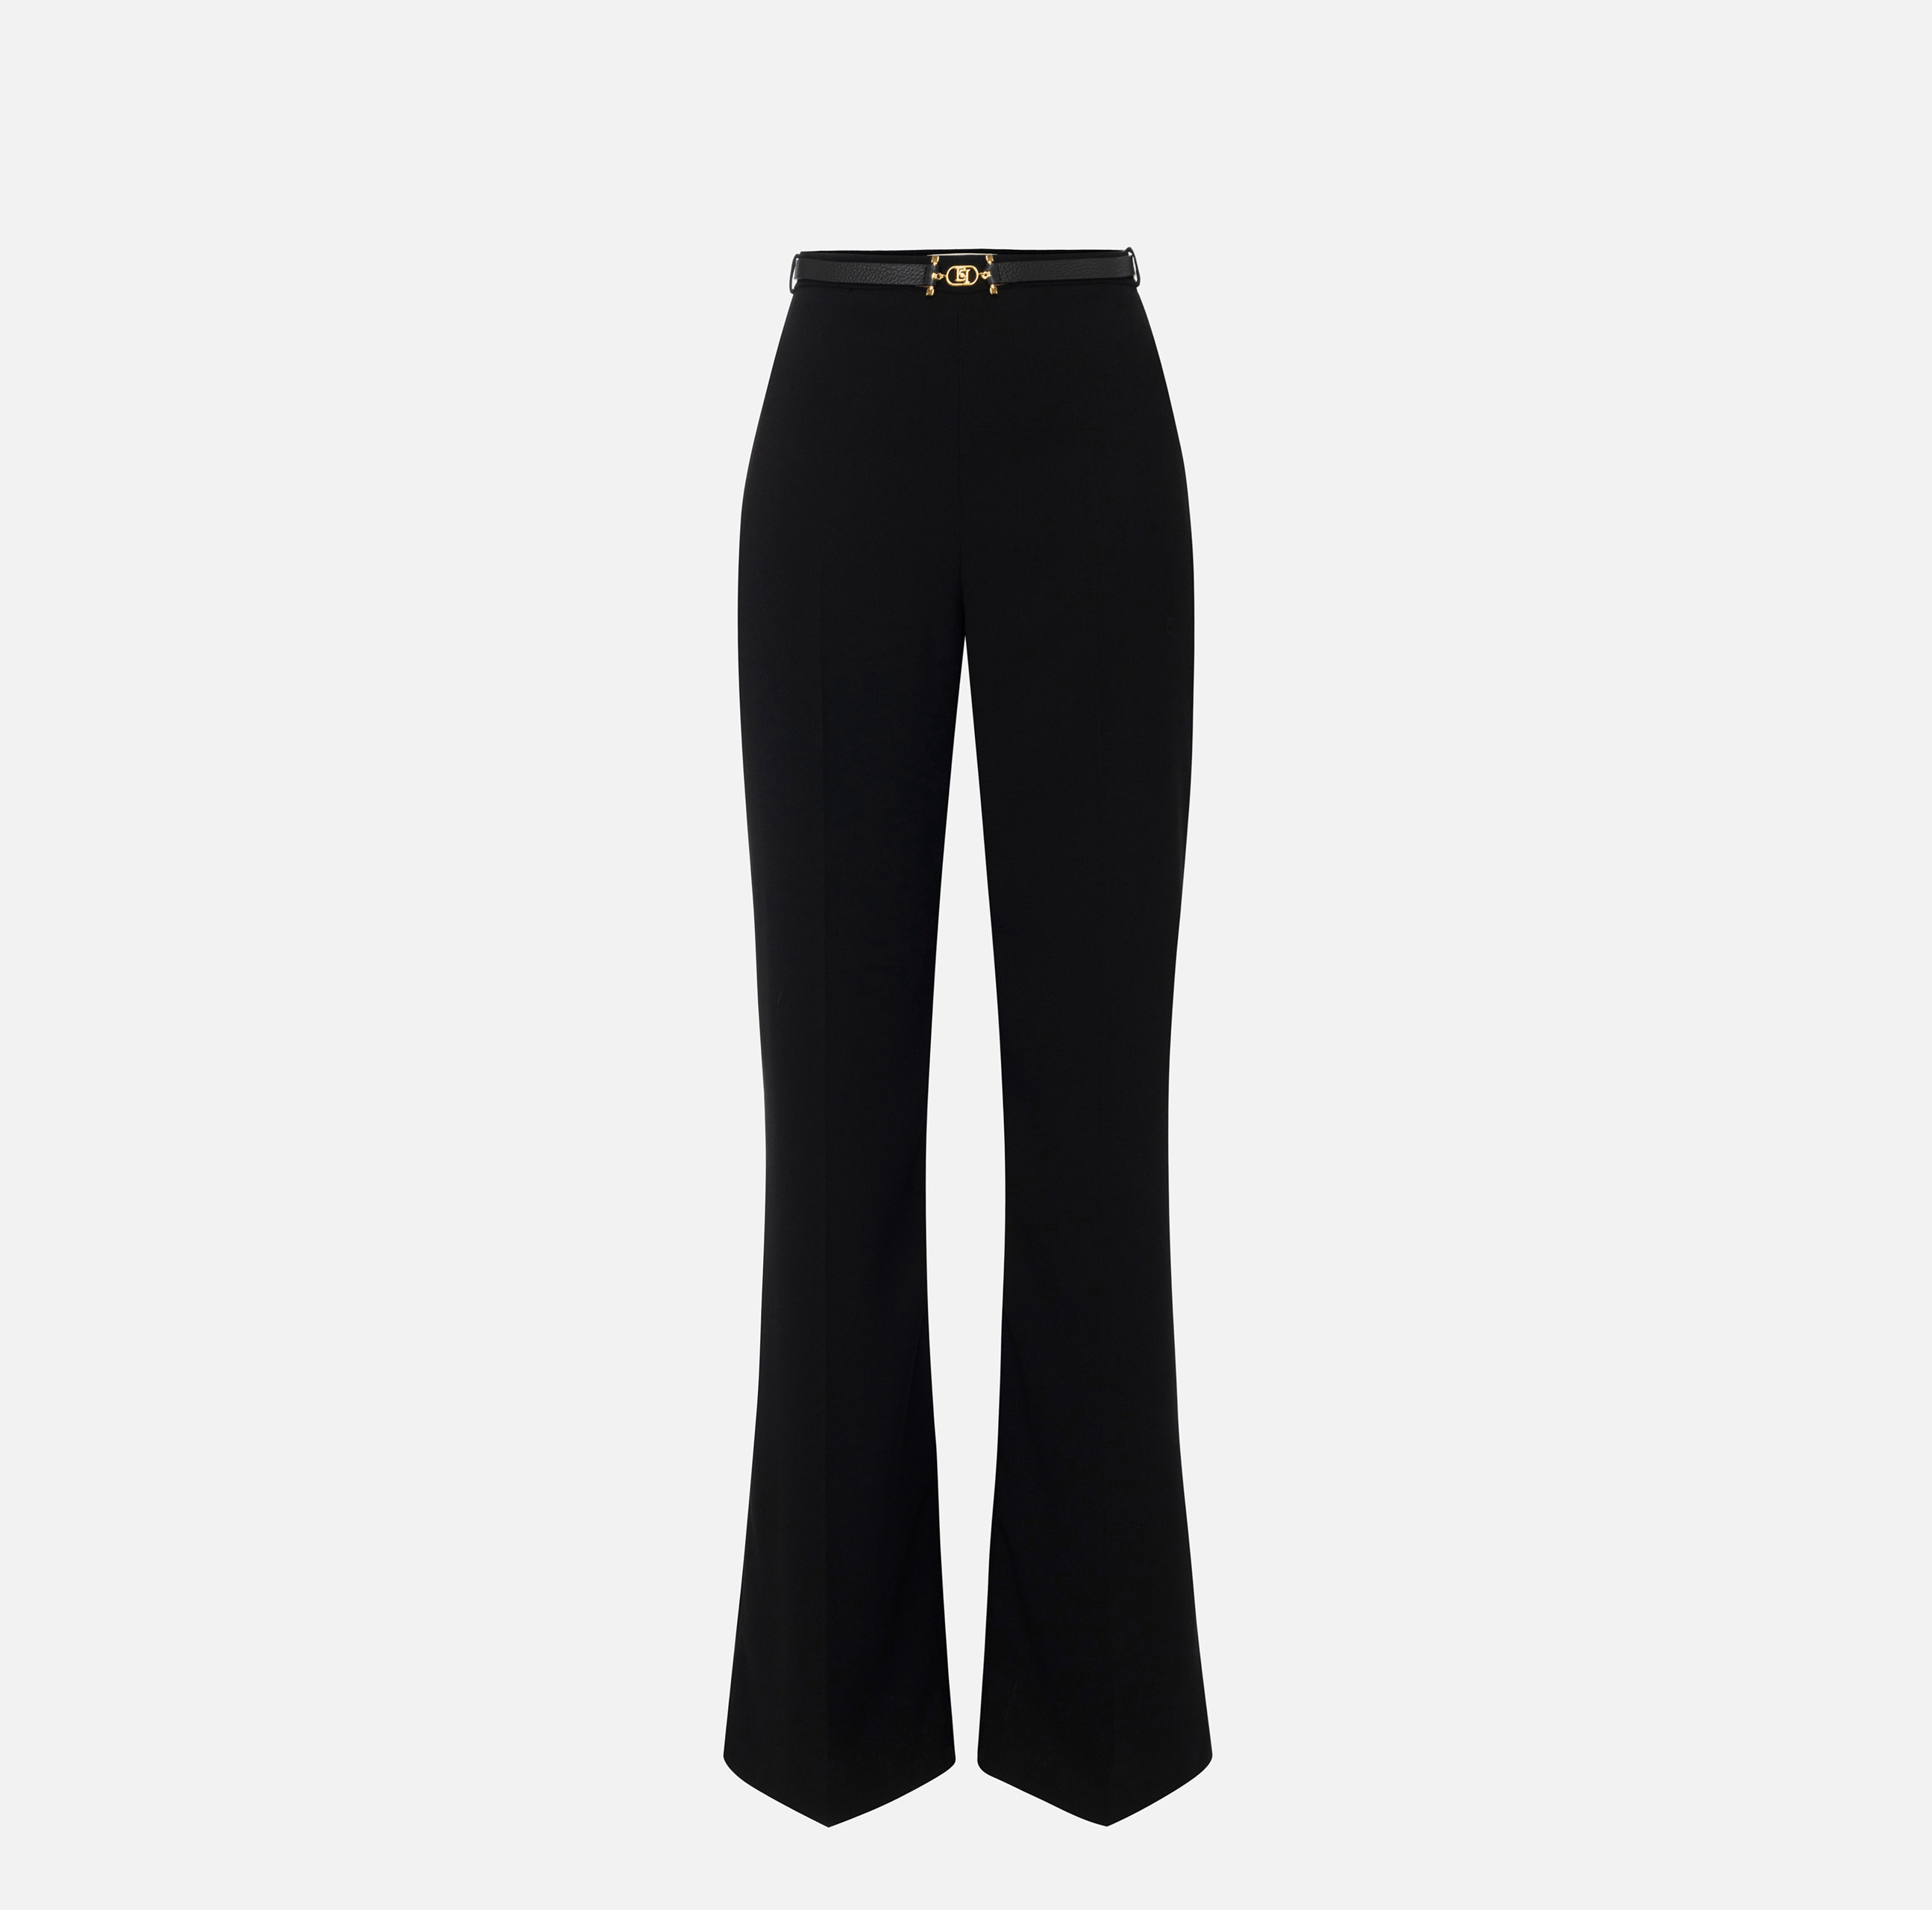 Palazzo trousers in flowing crêpe fabric with belt - Elisabetta Franchi